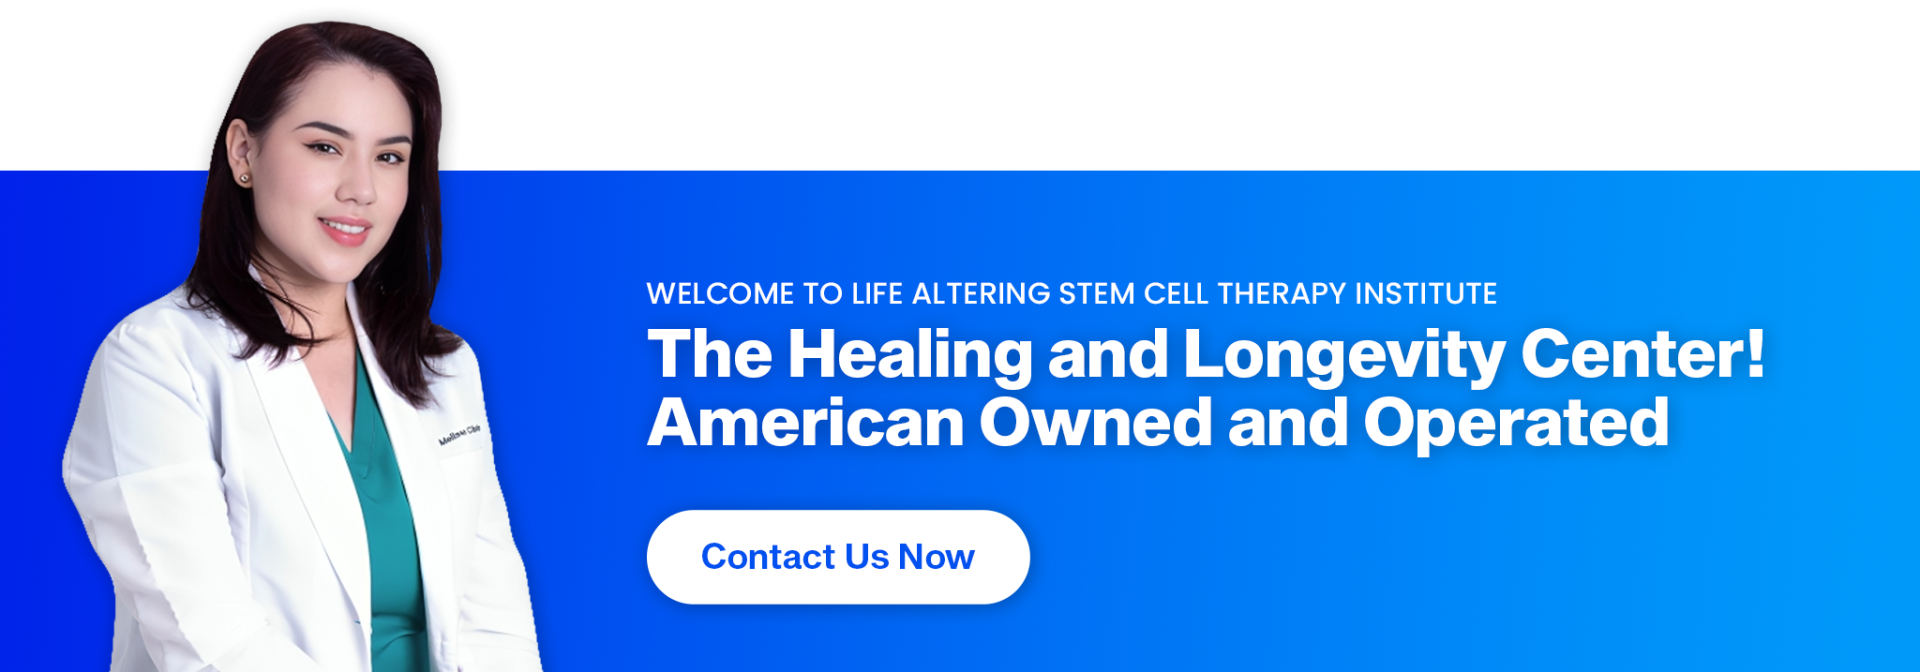 American Owned and Operated - Stem Cell Therapy Institute